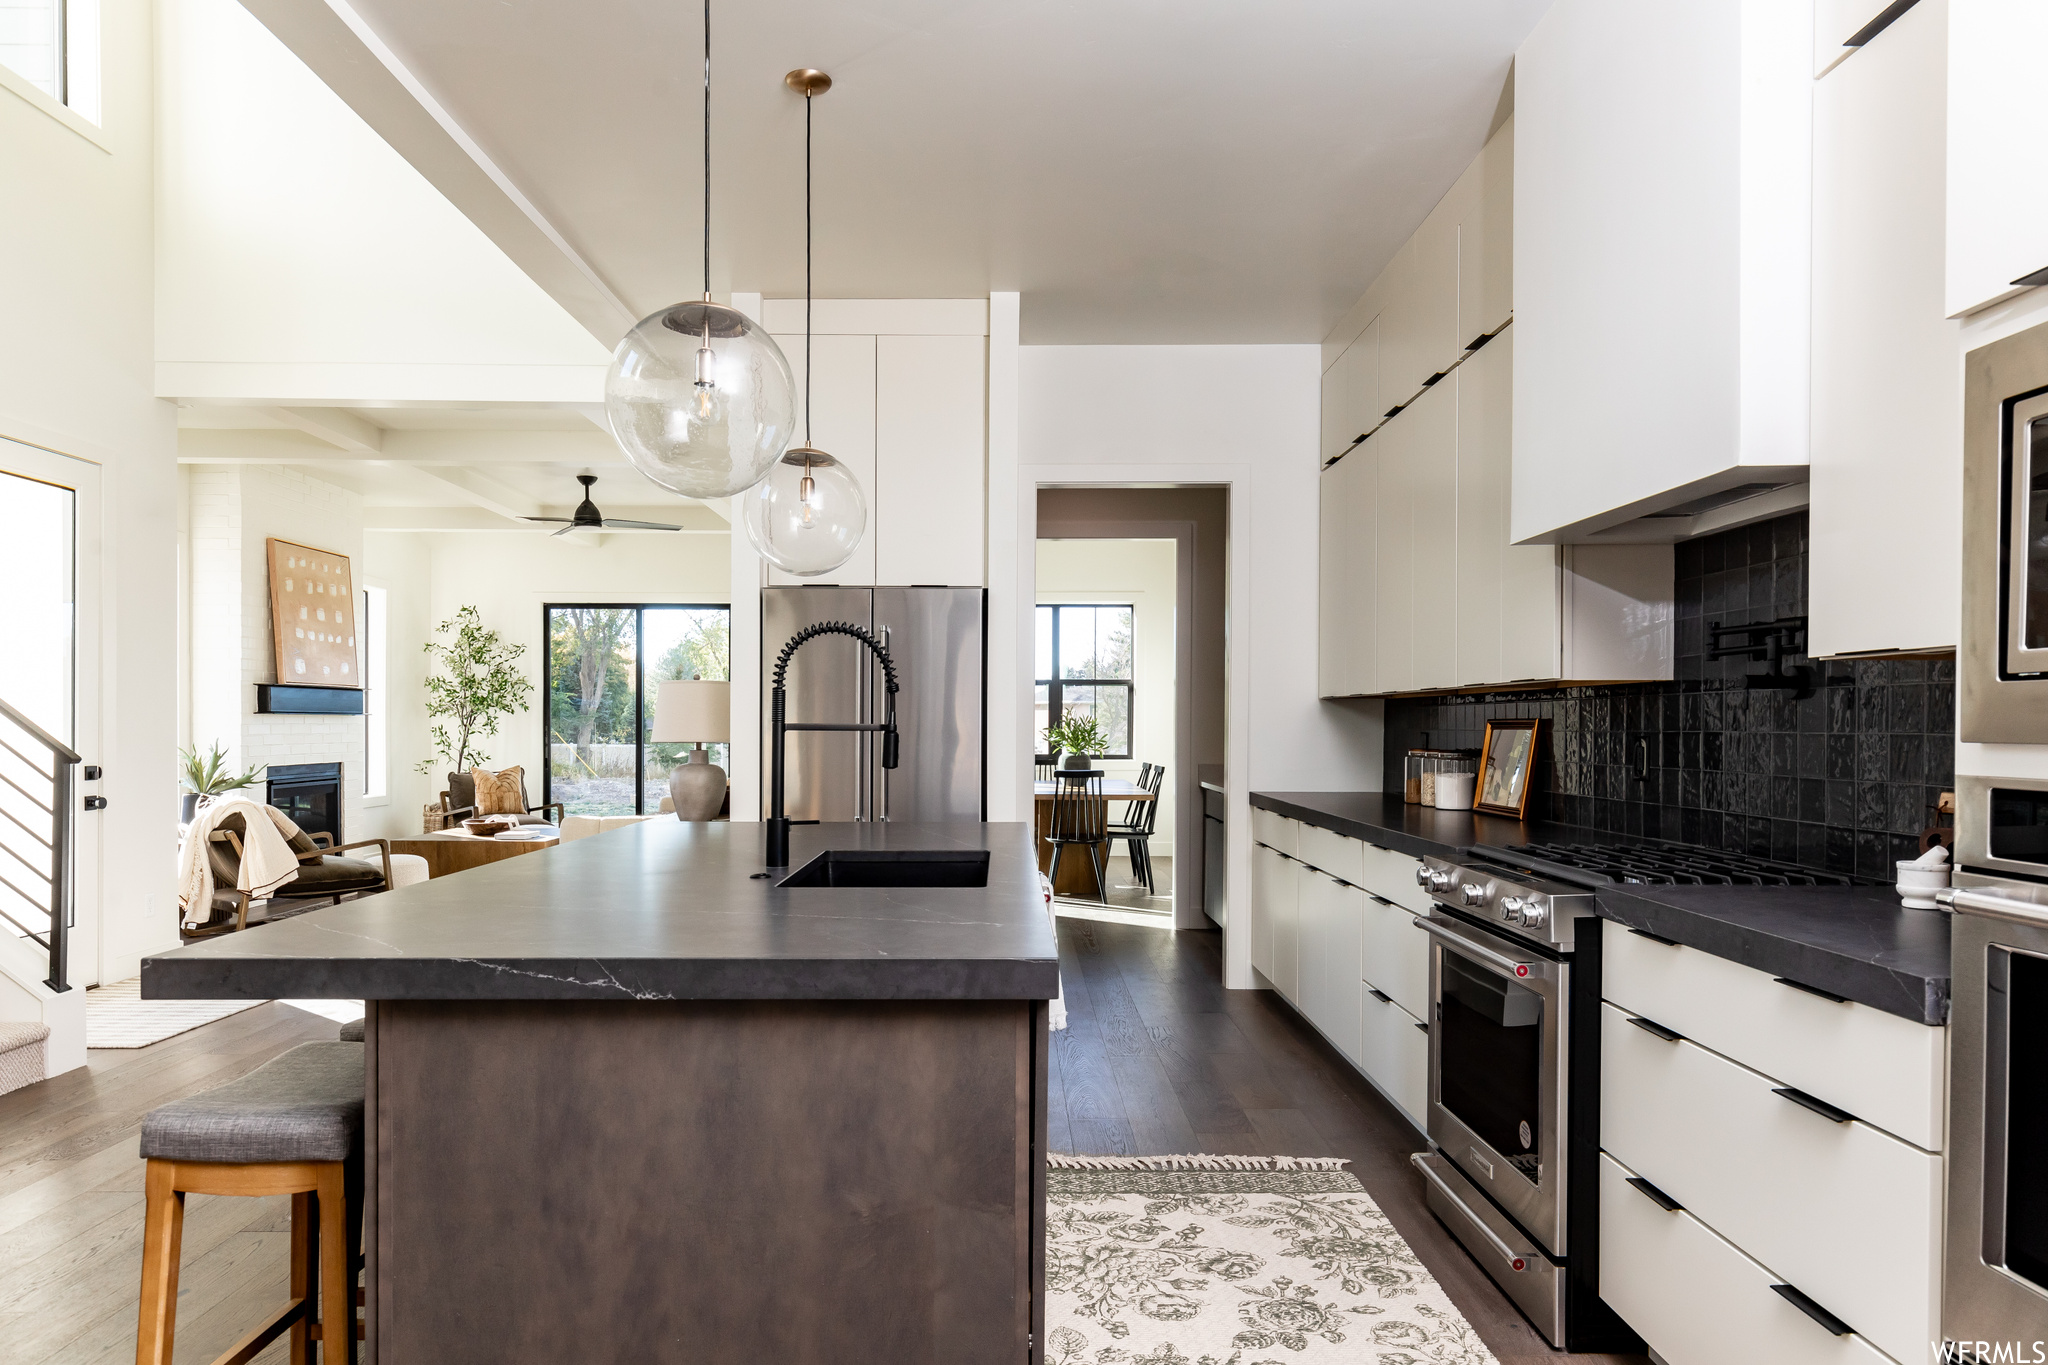 Kitchen with appliances with stainless steel finishes, tasteful backsplash, decorative light fixtures, dark hardwood / wood-style floors, and white cabinetry